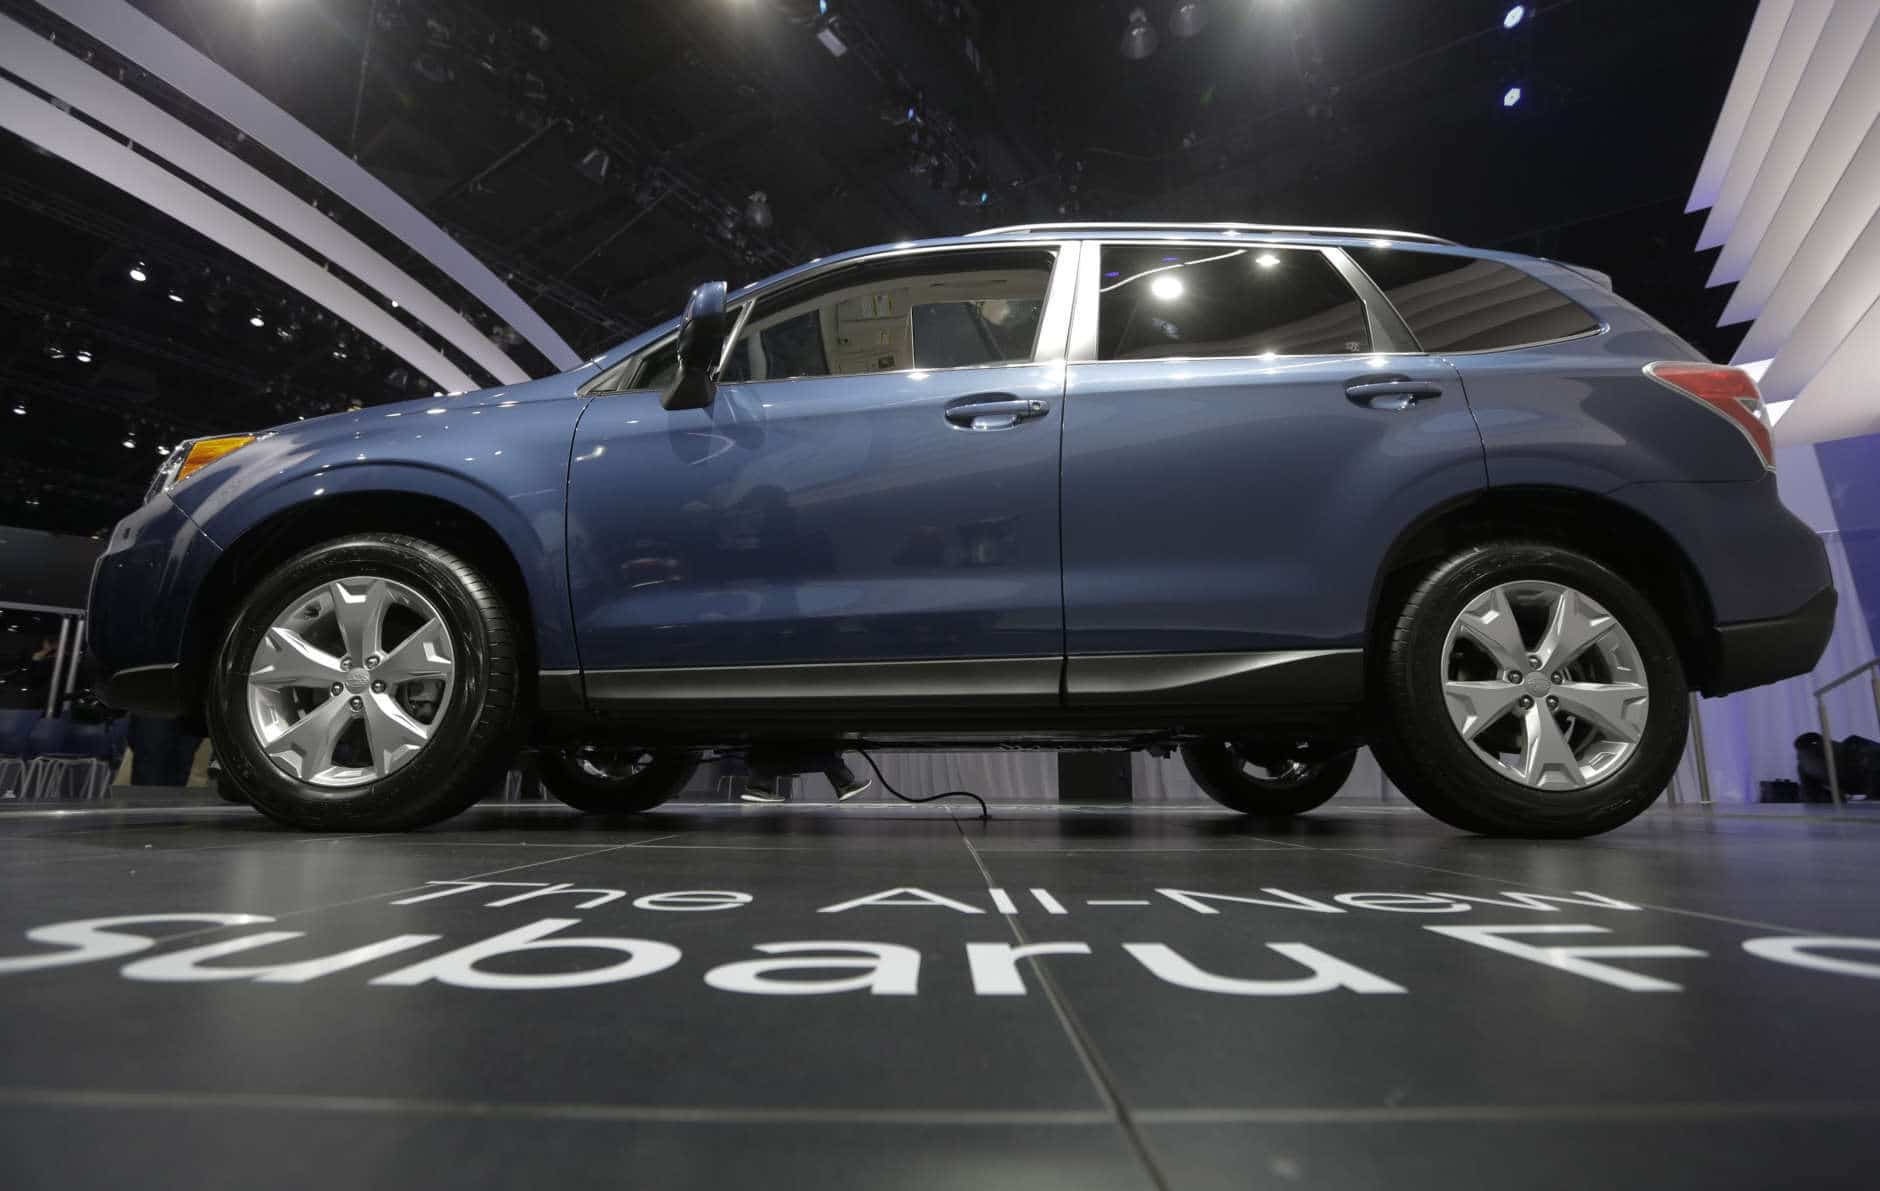 Subaru Forester is shown during it's world debut at the LA Auto Show in Los Angeles, Wednesday, Nov. 28, 2012. (AP Photo/Chris Carlson)